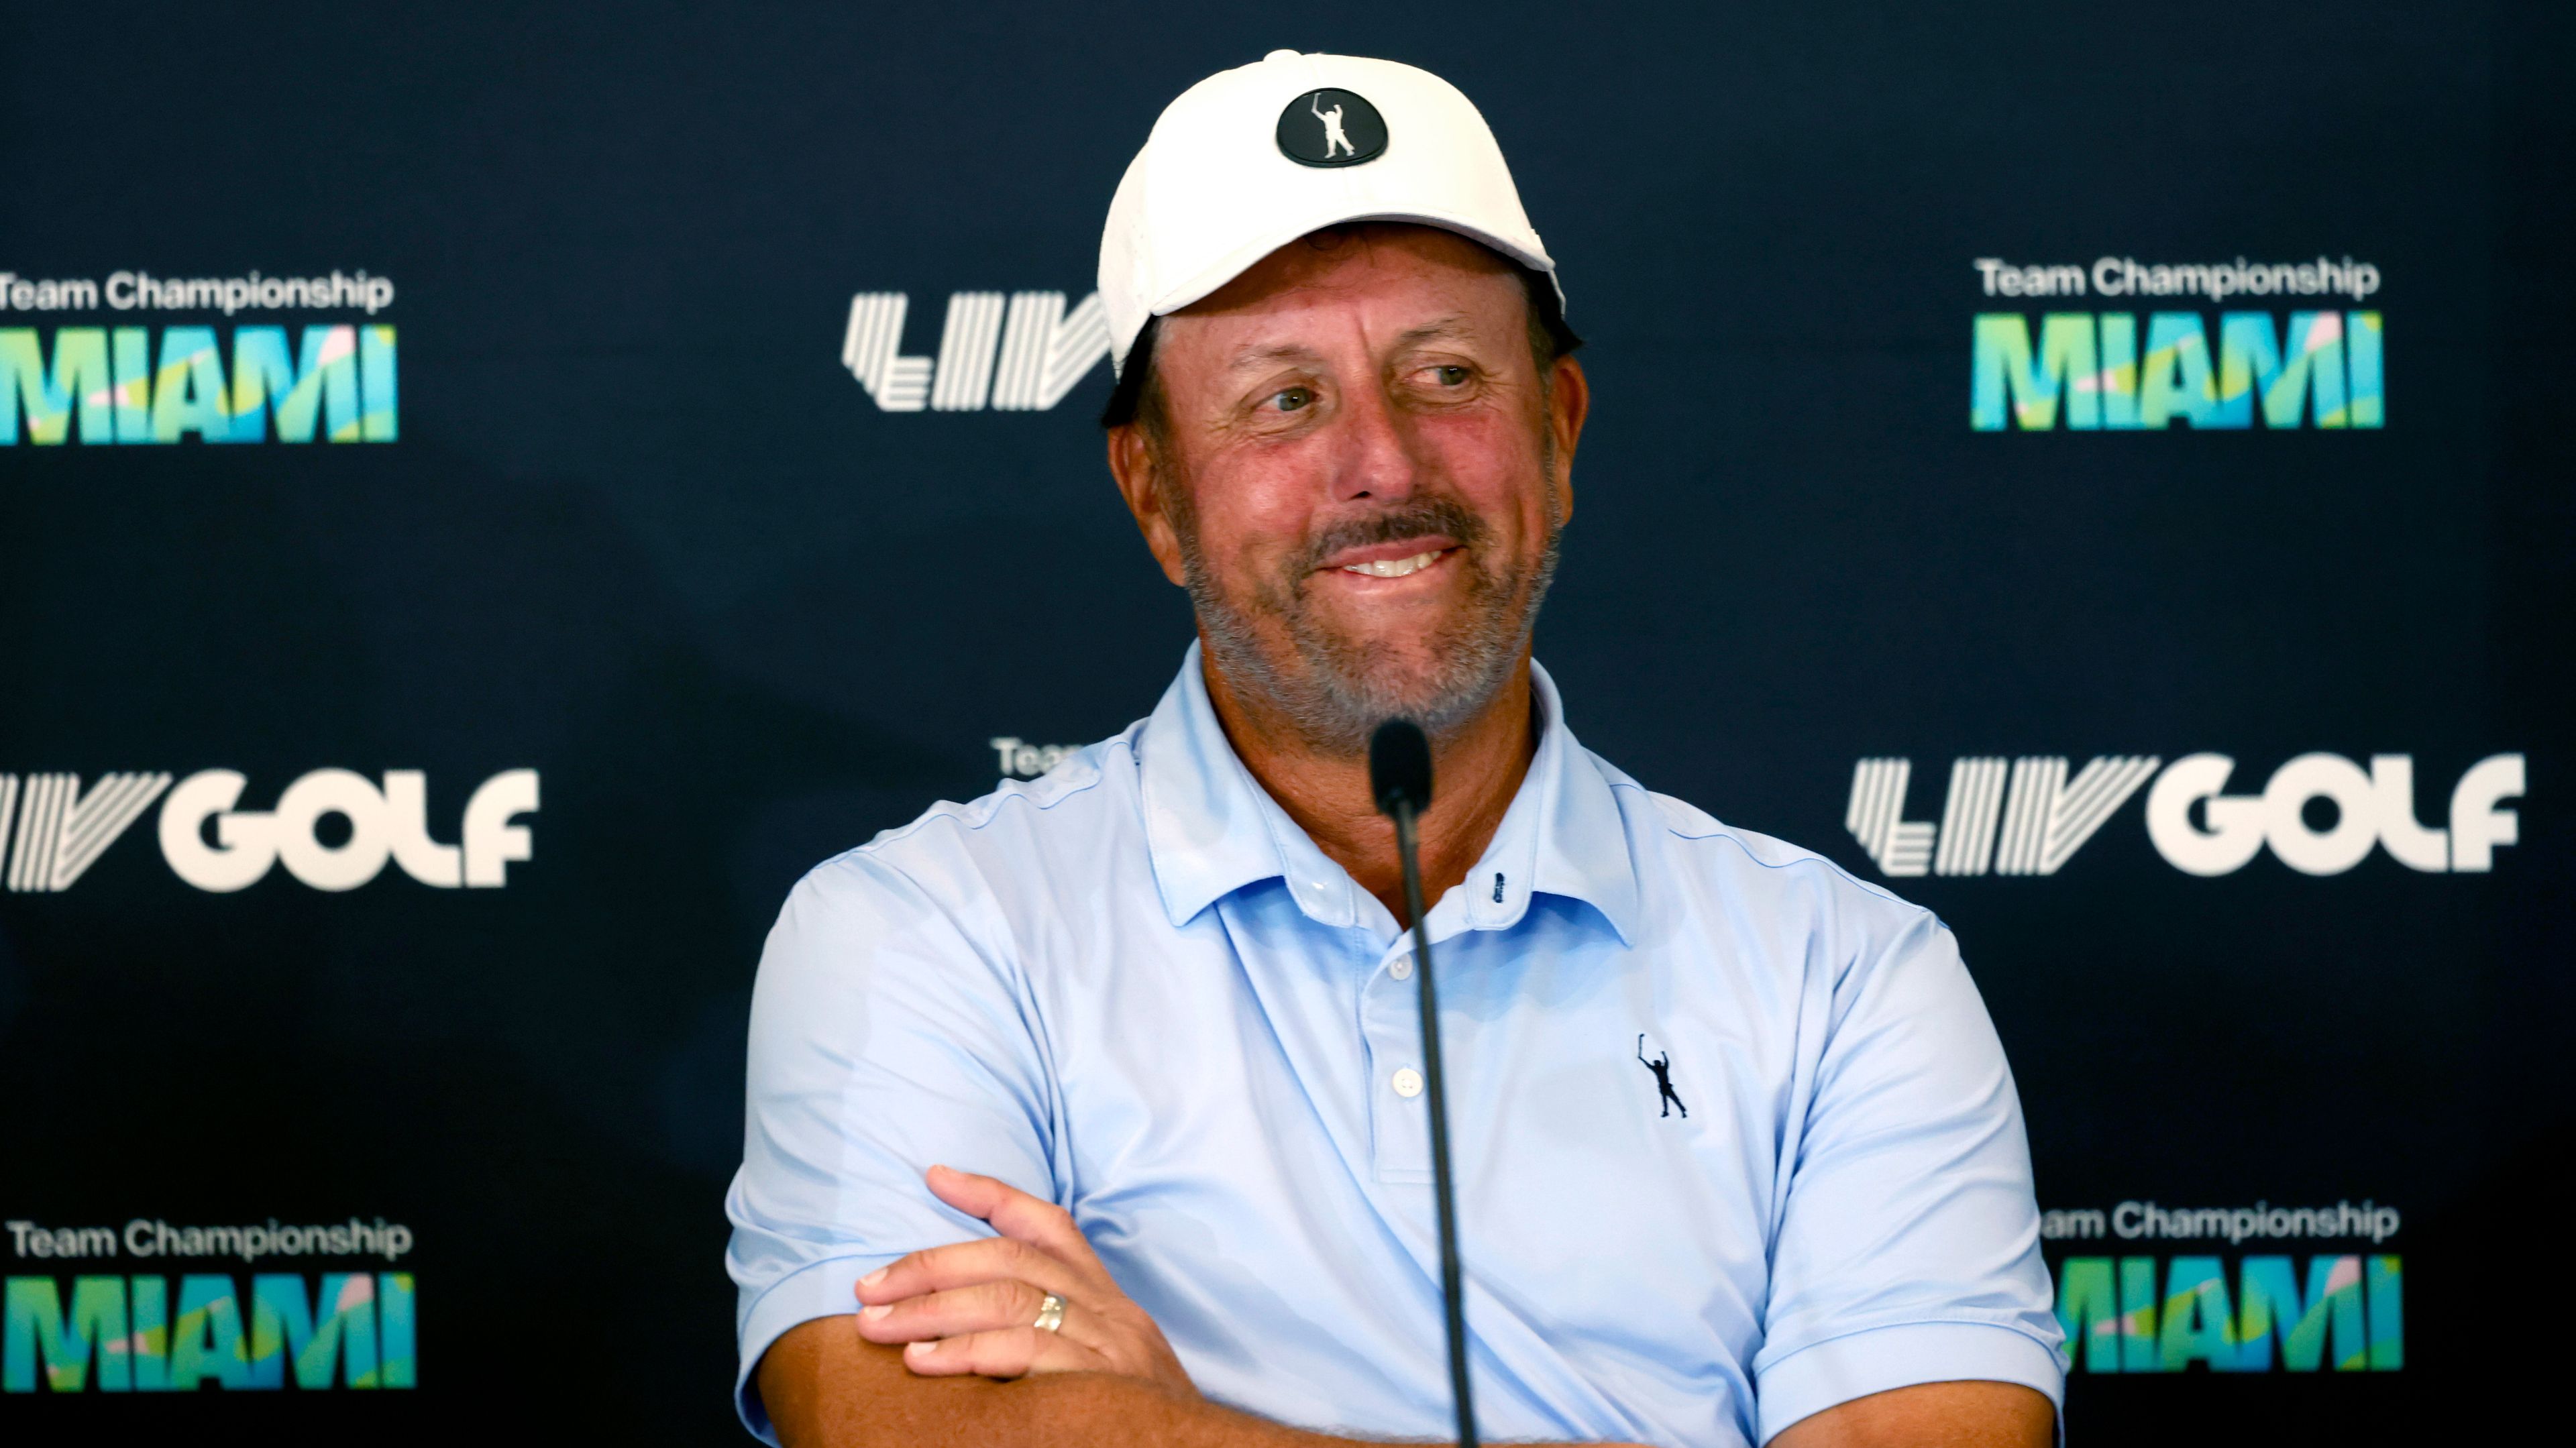 Phil Mickelson, Team Captain  of Hy Flyers GC, speaks to the media during the LIV Golf Team Championship Press Conference  prior to the LIV Golf Team Championship - Miami at Trump National Doral Miami on October 26, 2022 in Doral, Florida. (Photo by Chris Trotman/LIV Golf/via Getty Images)